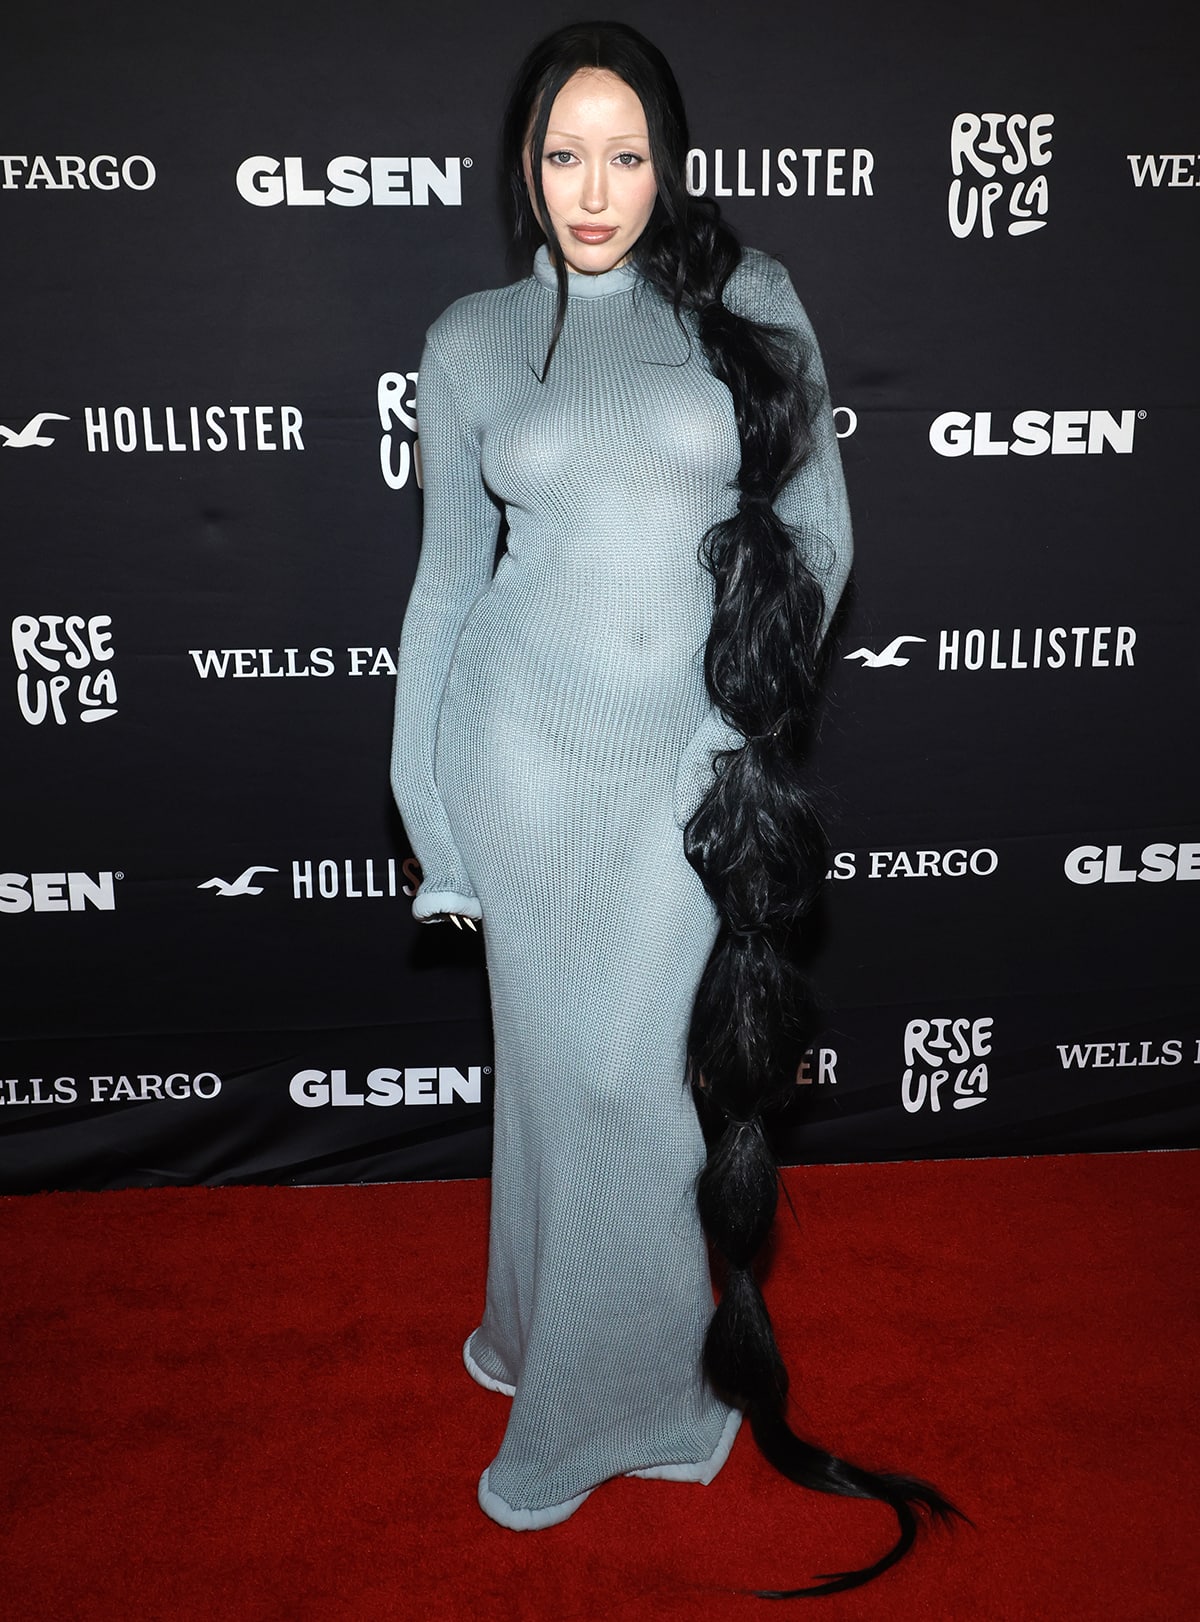 Noah Cyrus turns heads in a form-fitting aqua gray knit dress by Colors Clothing Company at GLSEN’s Rise Up LA Benefit Gala held at NeueHouse Hollywood on October 29, 2023